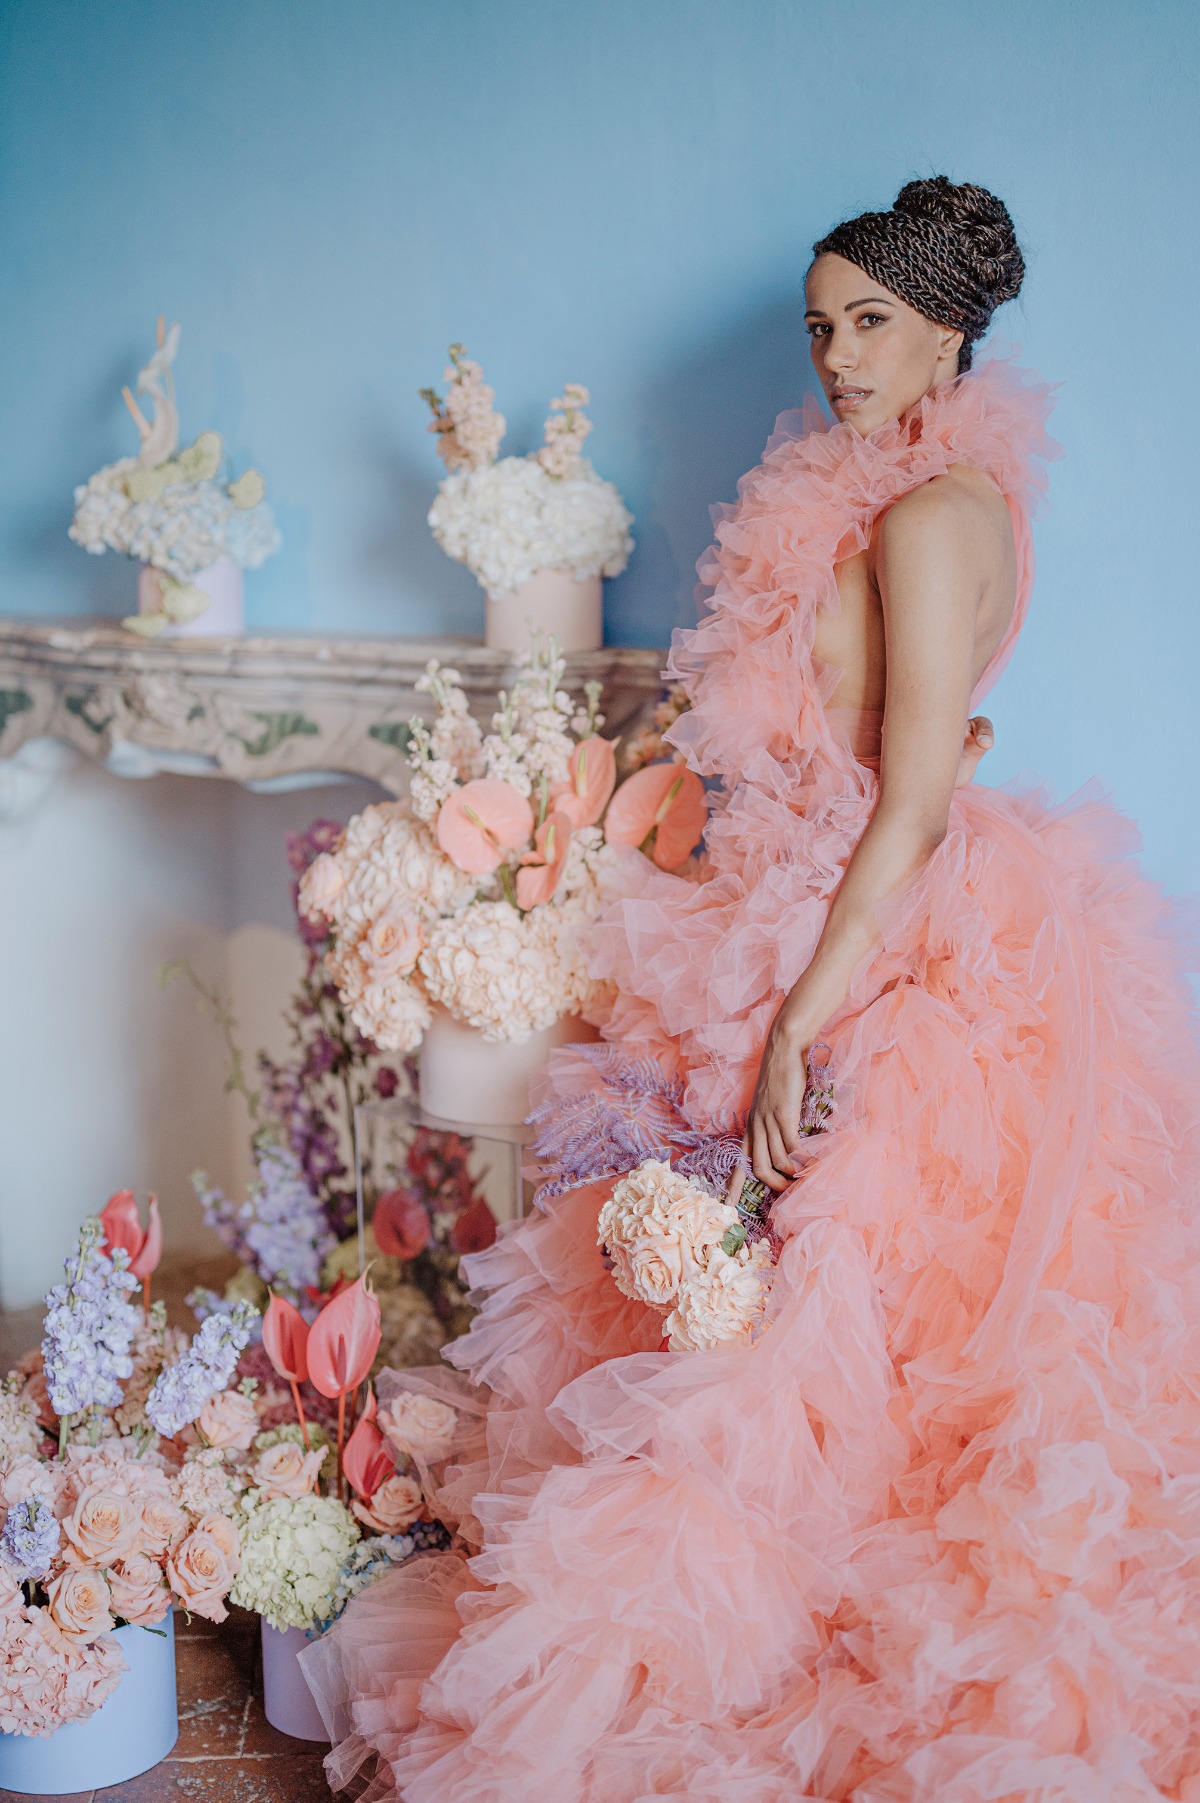 Bride in orange ruffled dress surrounded by florals in front of blue wall